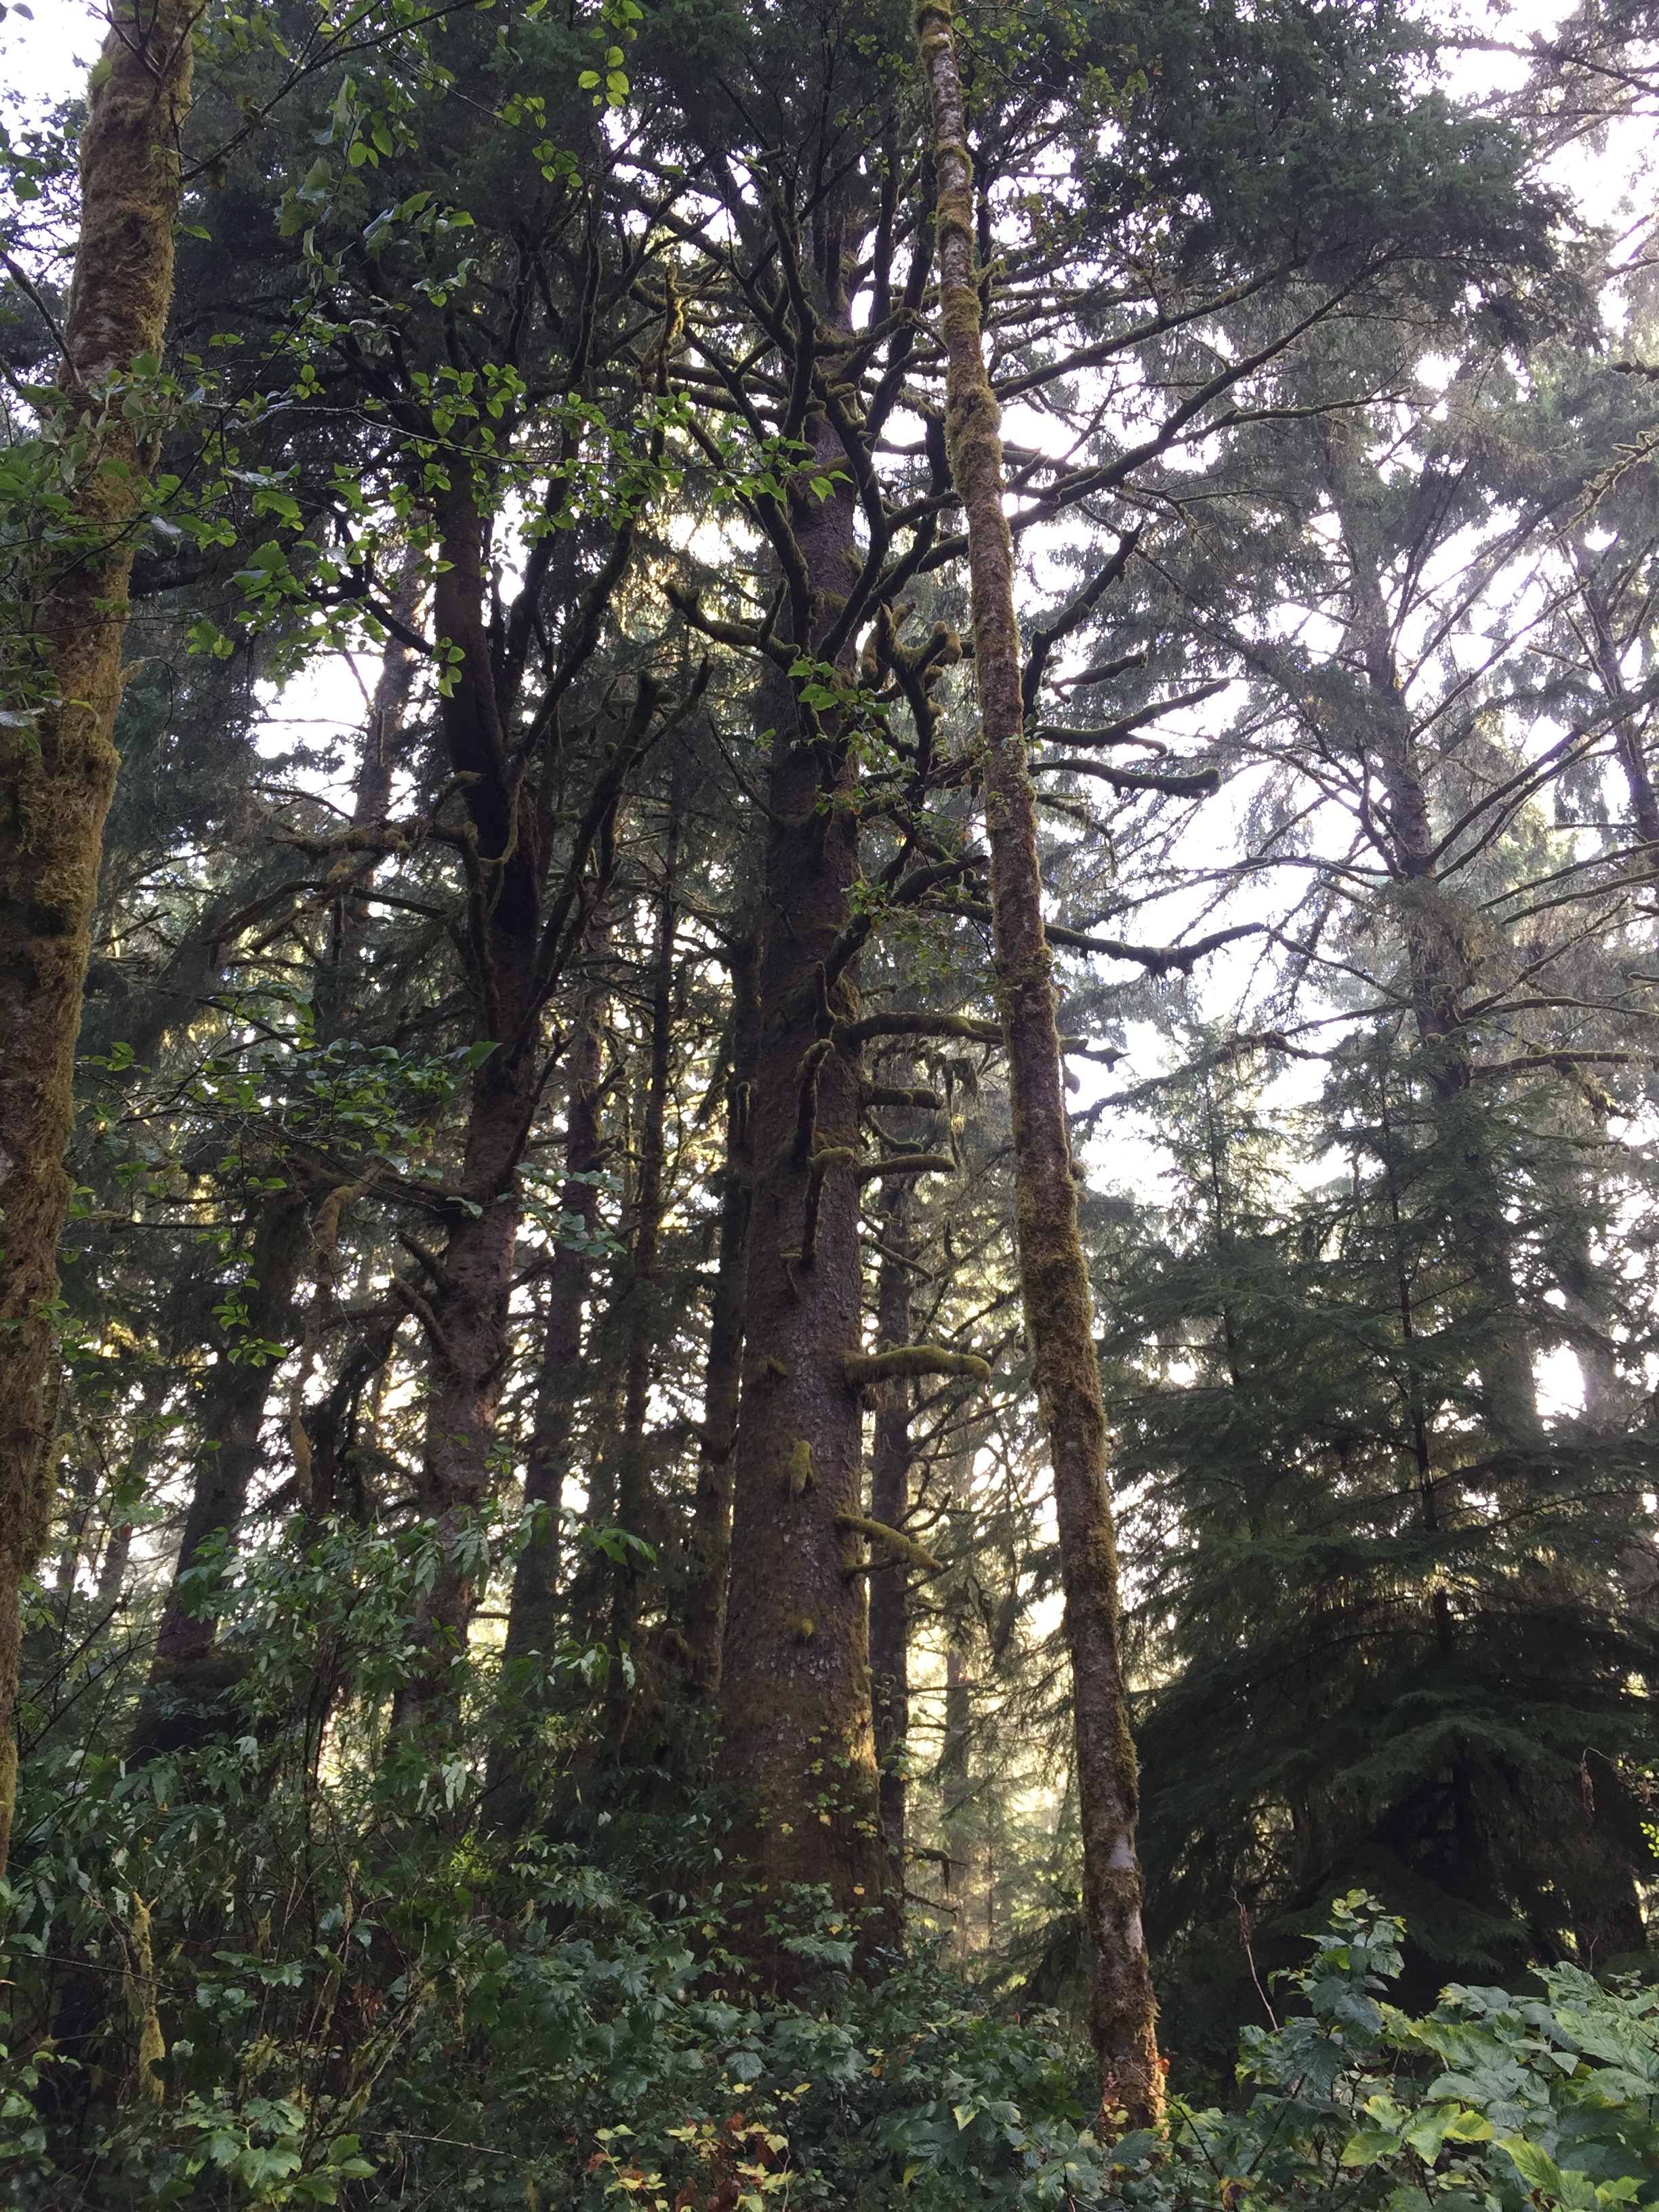 Shabbat morning as the sun is shining through a forest of giant, moss-covered sitka spruces.